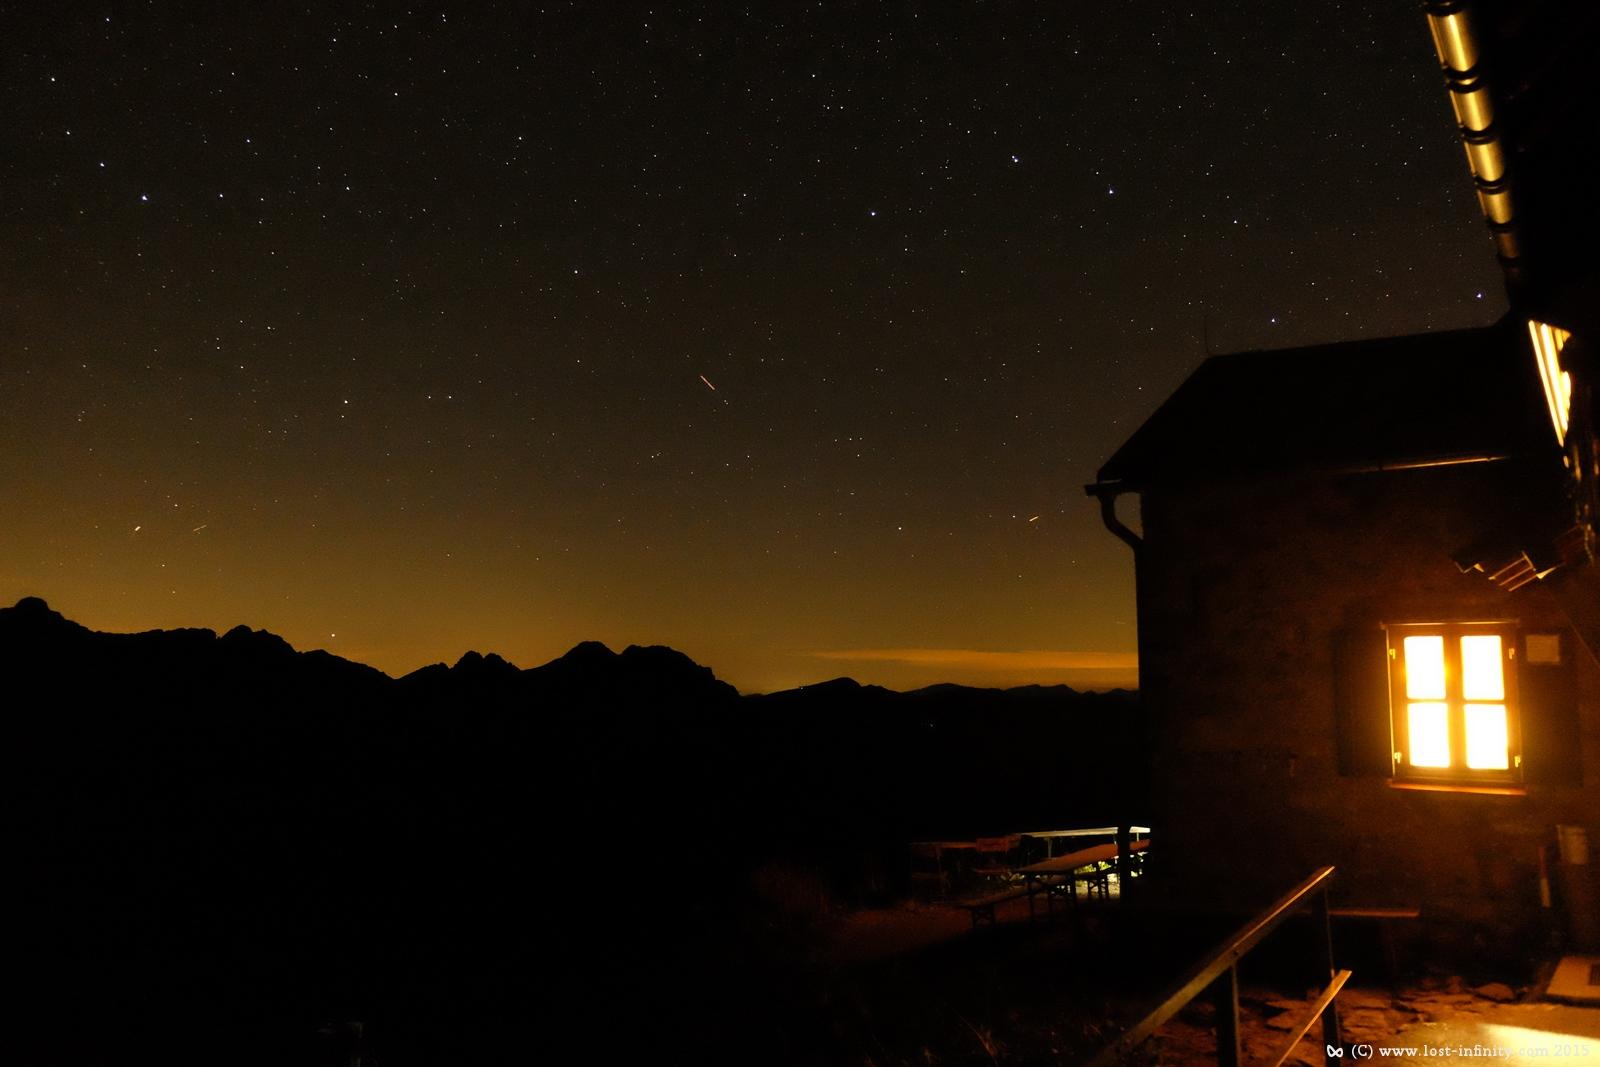 Illuminated mountain hut in front of mountains and night sky